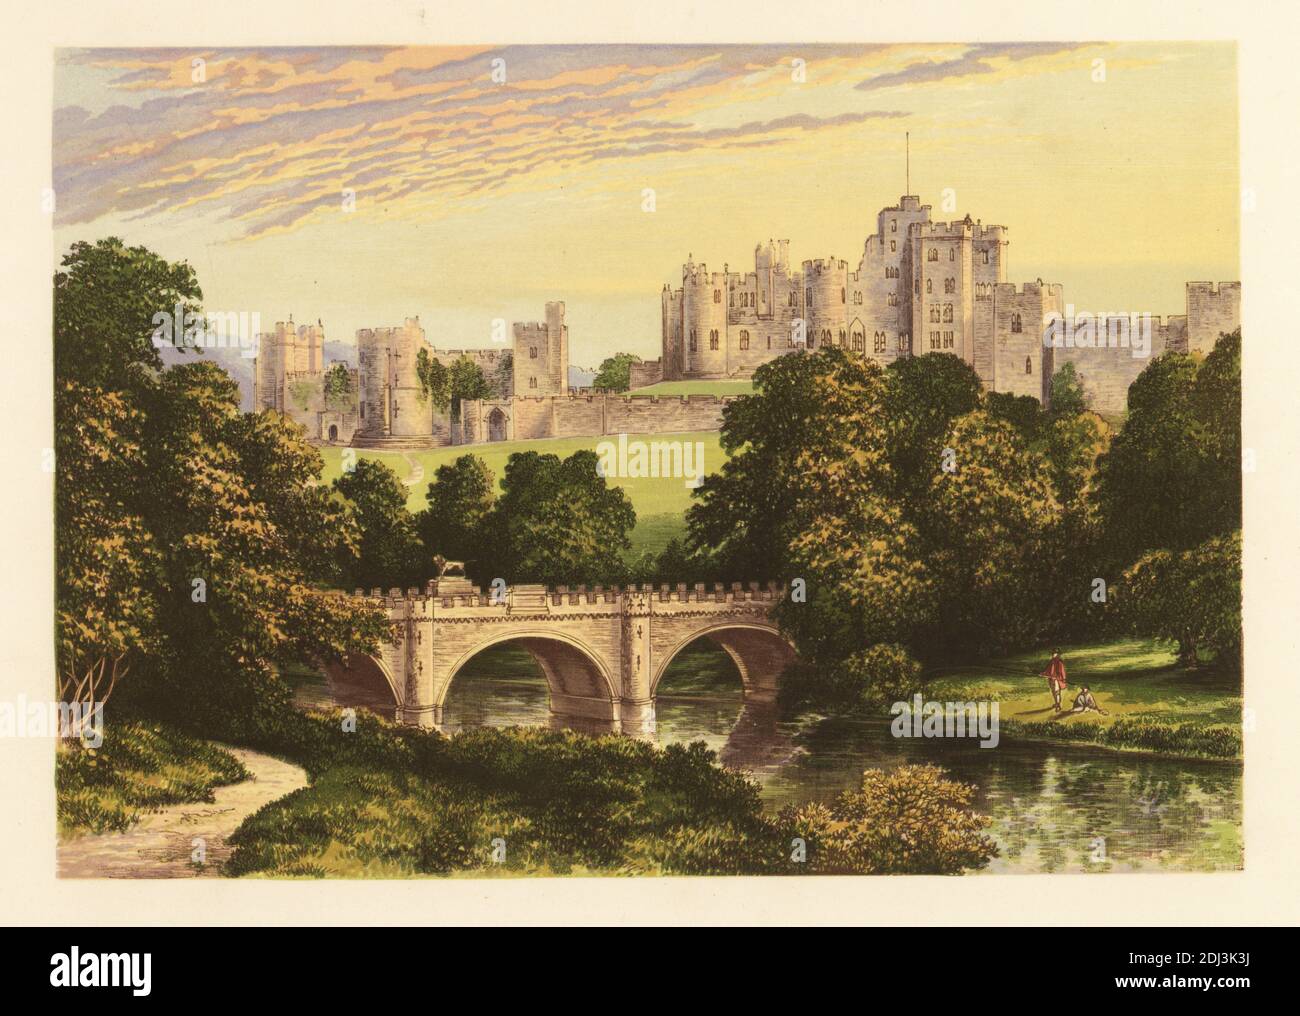 Alnwick Castle, bridge and moat, Northumberland, England. Norman castle built in 1096, renovated in the 18th century by Robert Adam and James Paine with landscaped grounds by Capability Brown, and again in the 19th century by Anthony Savin and Luigi Canina for Algernon Percy, 4th Duke of Northumberland. Colour woodblock by Benjamin Fawcett in the Baxter process of an illustration by Alexander Francis Lydon from Reverend Francis Orpen Morris’s Picturesque Views of the Seats of Noblemen and Gentlemen of Great Britain and Ireland, William Mackenzie, London, 1880. Stock Photo